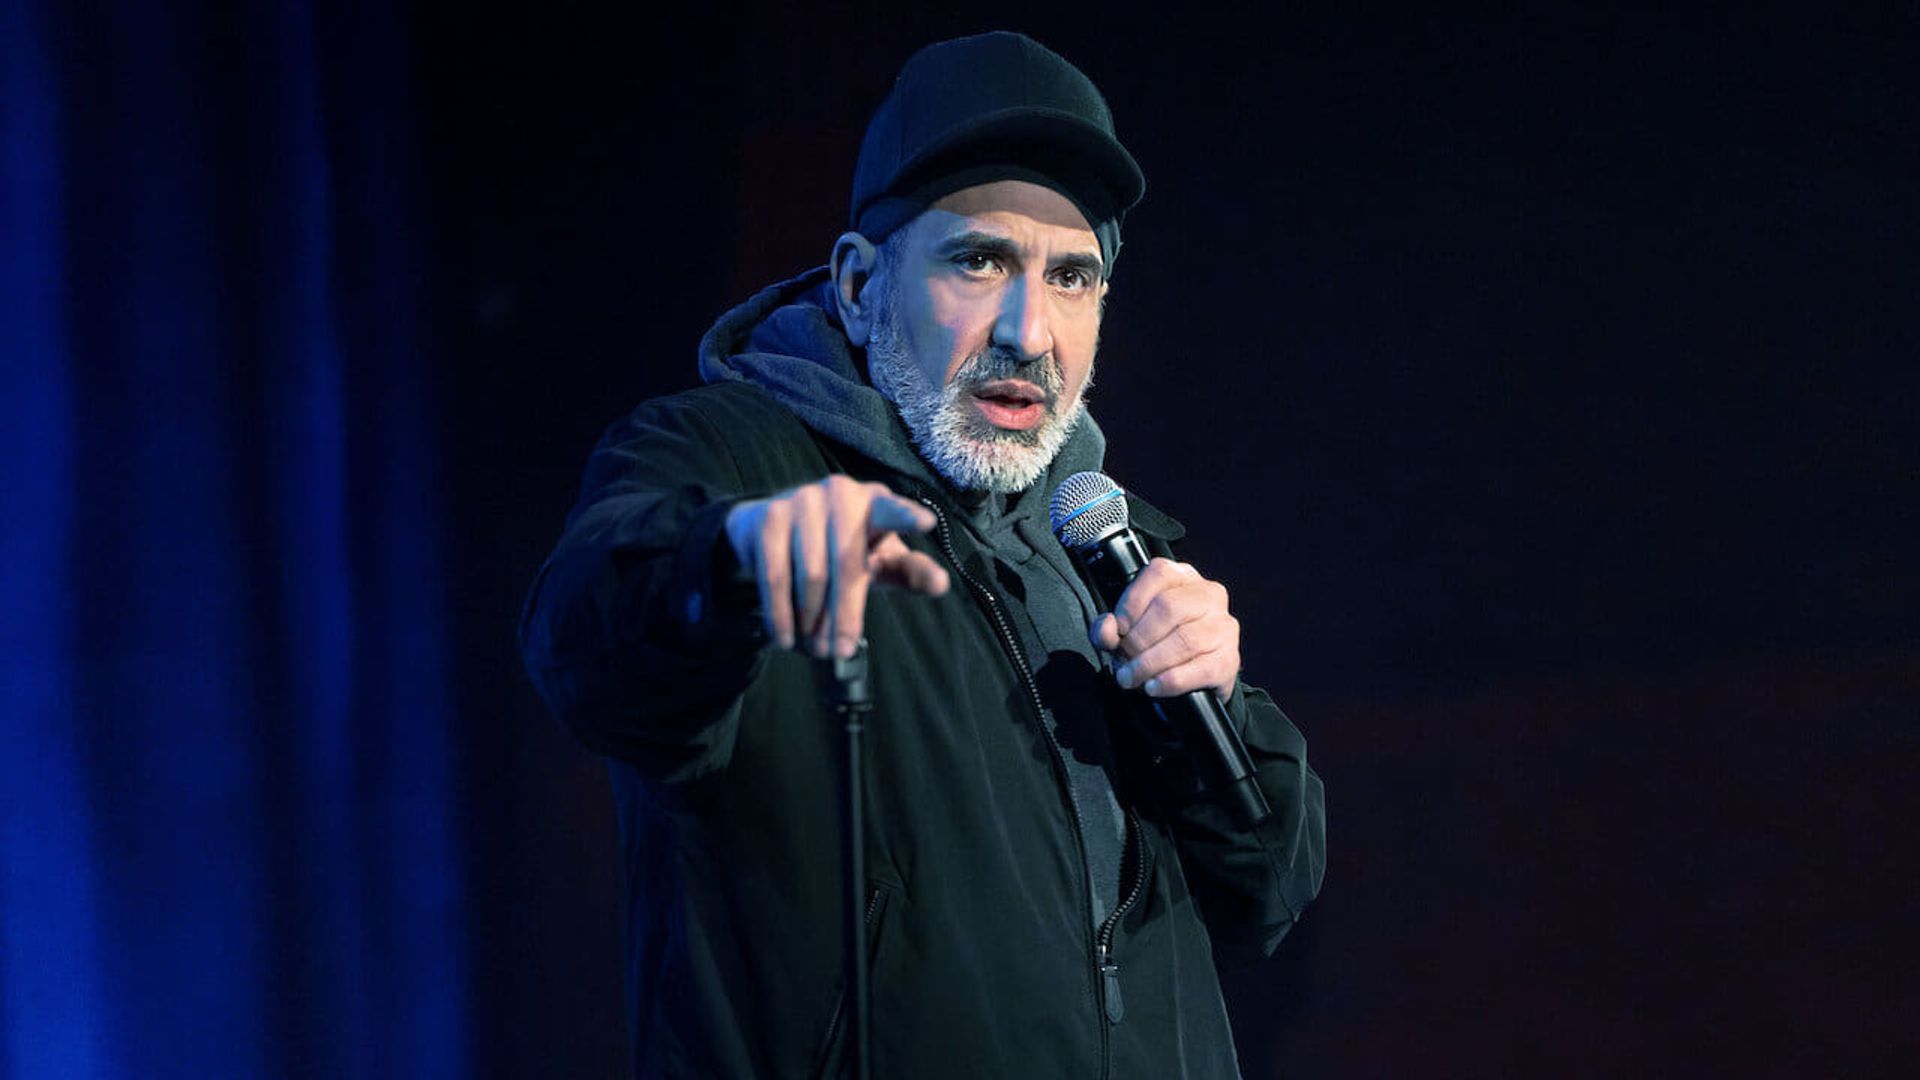 Dave Attell: Hot Cross Buns background